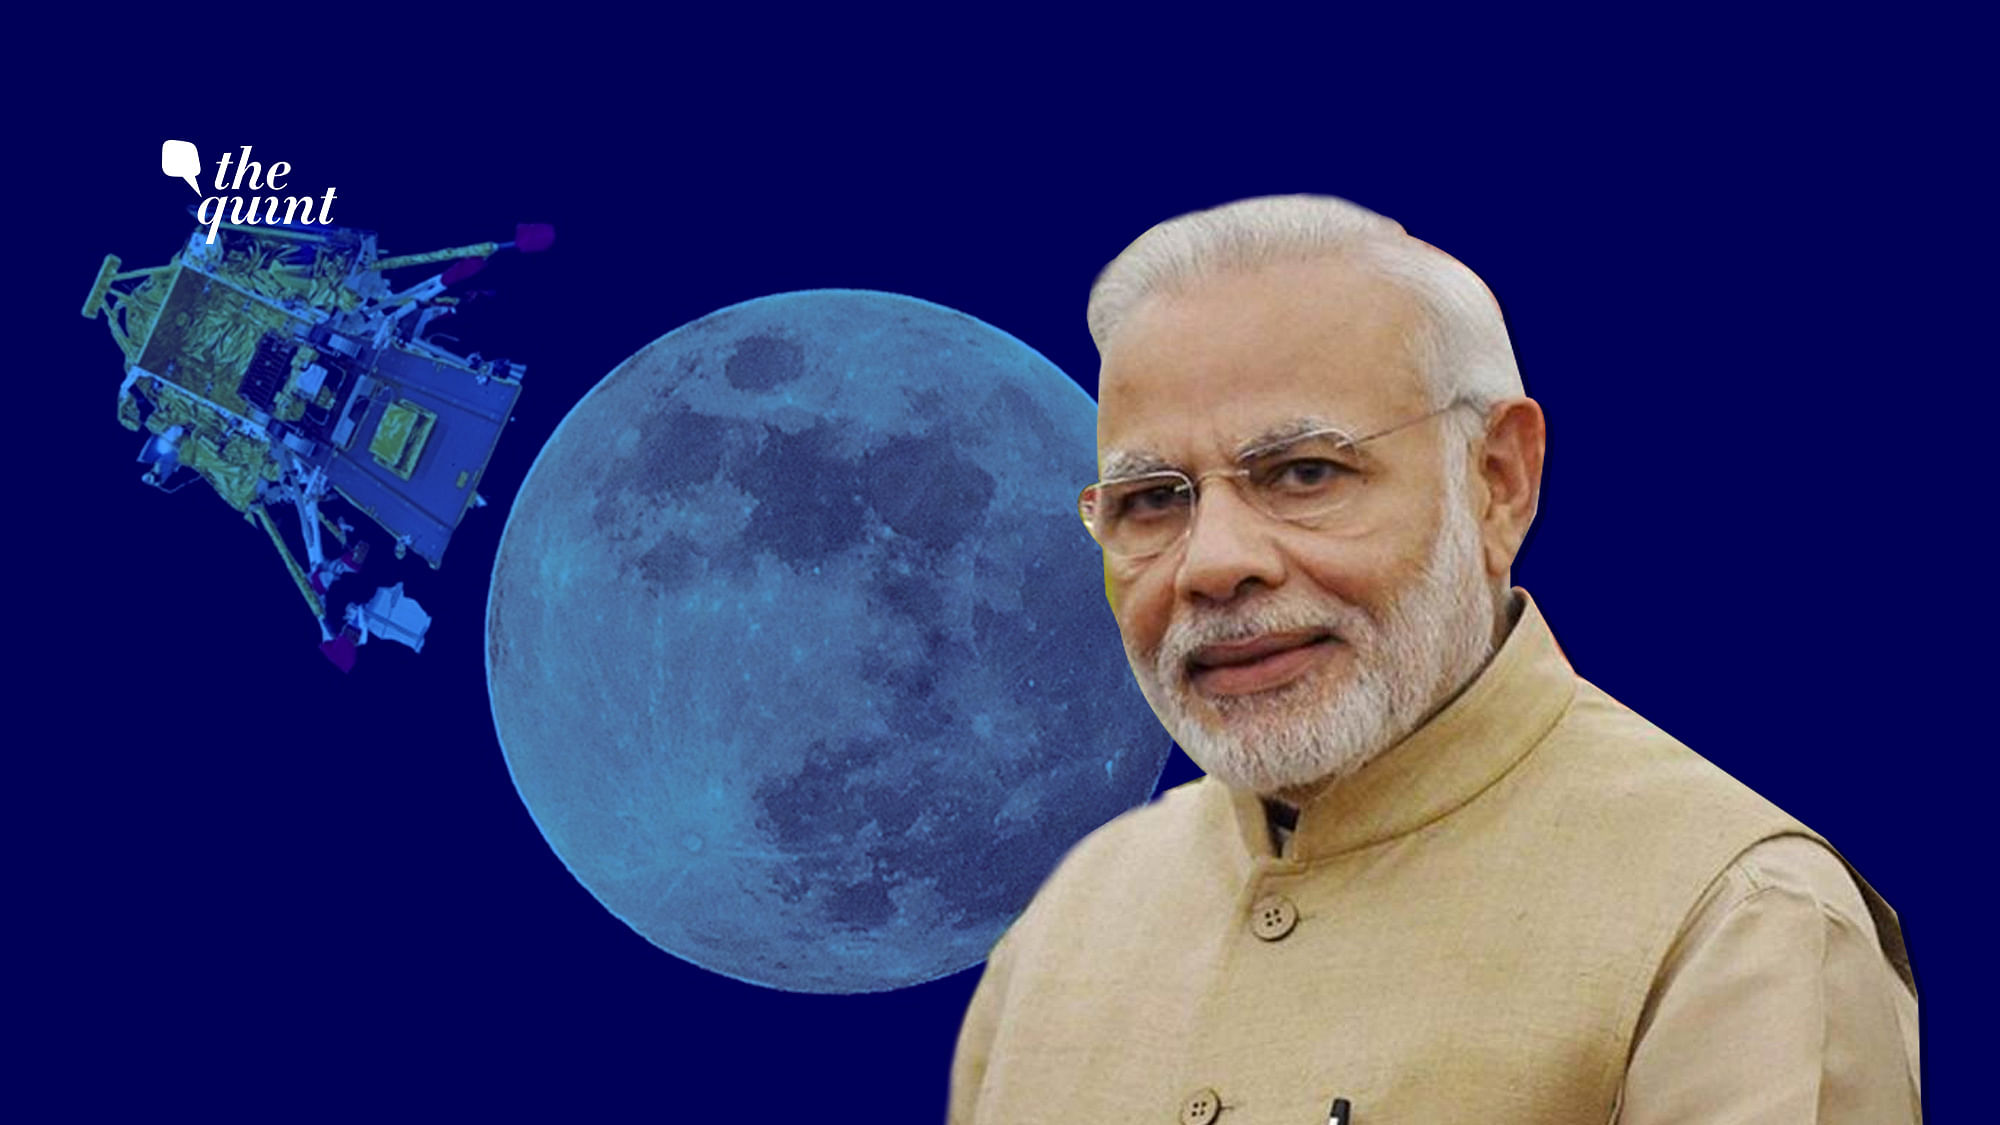 The handling of the Chandrayaan-2 mission has drawn attention to the hype and publicity which preceded its launch. The questions being asked are, “Was all the hoopla necessary? Could it have been avoided?”